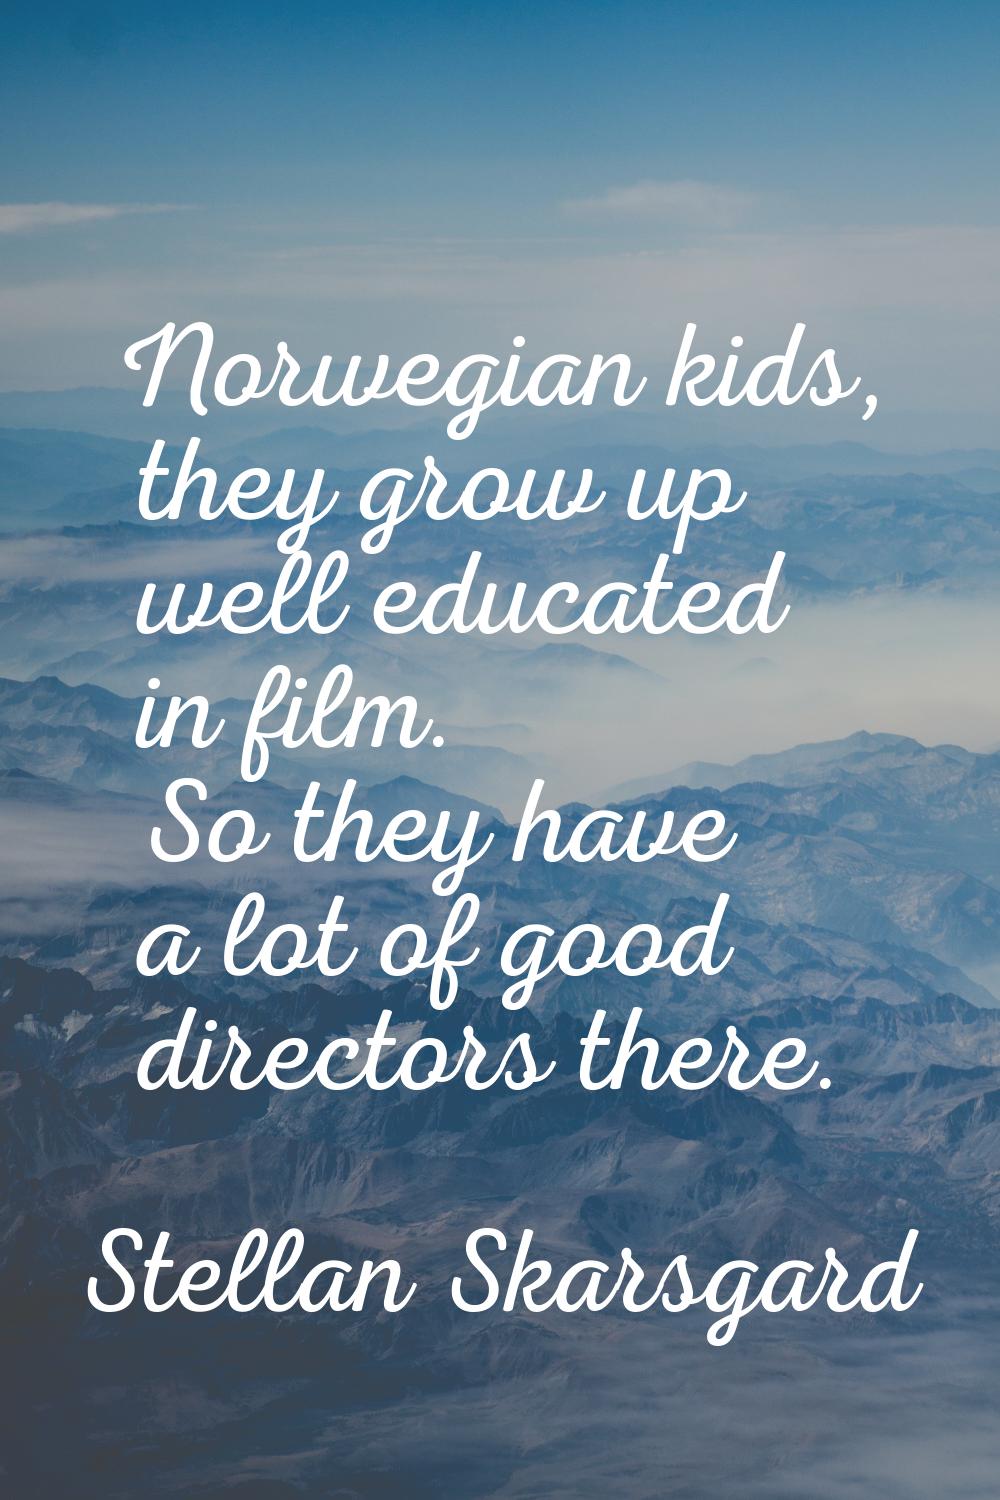 Norwegian kids, they grow up well educated in film. So they have a lot of good directors there.